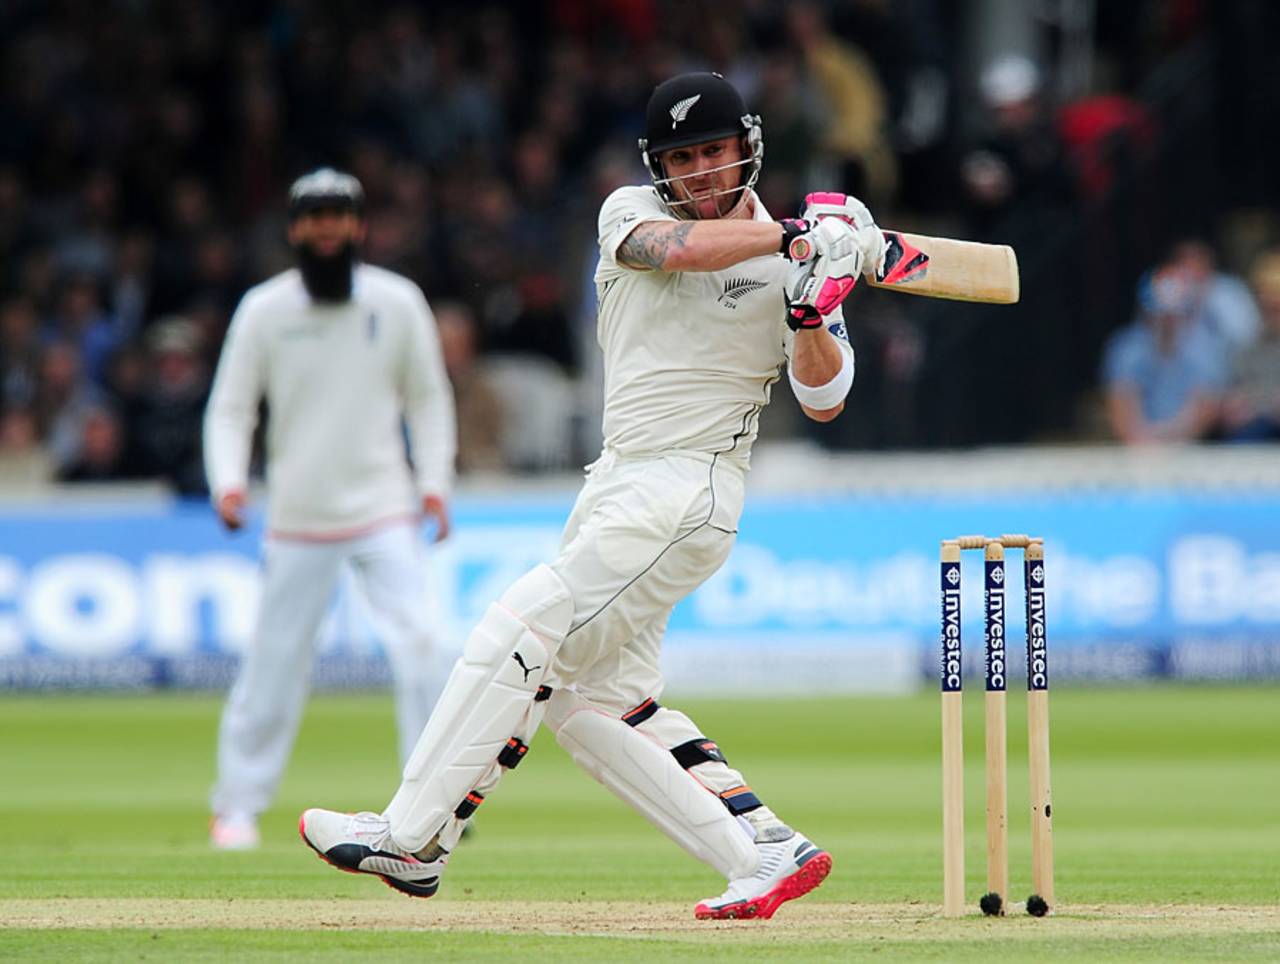 Brendon McCullum's innings was full of aggression, England v New Zealand, 1st Investec Test, Lord's, 3rd day, May 23, 2015